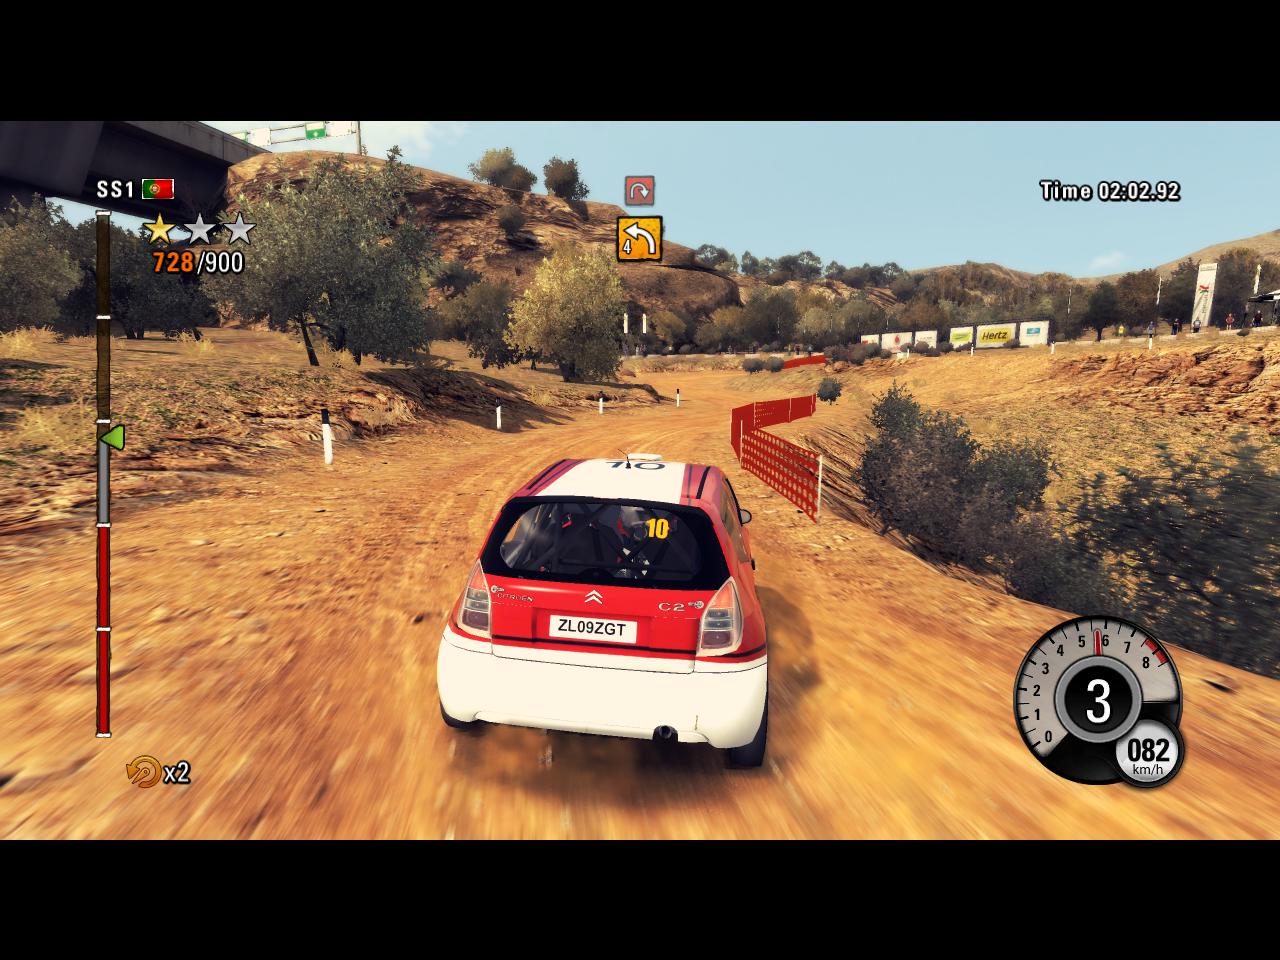 colin mcrae rally 2005 windows 7 32 bit patch download